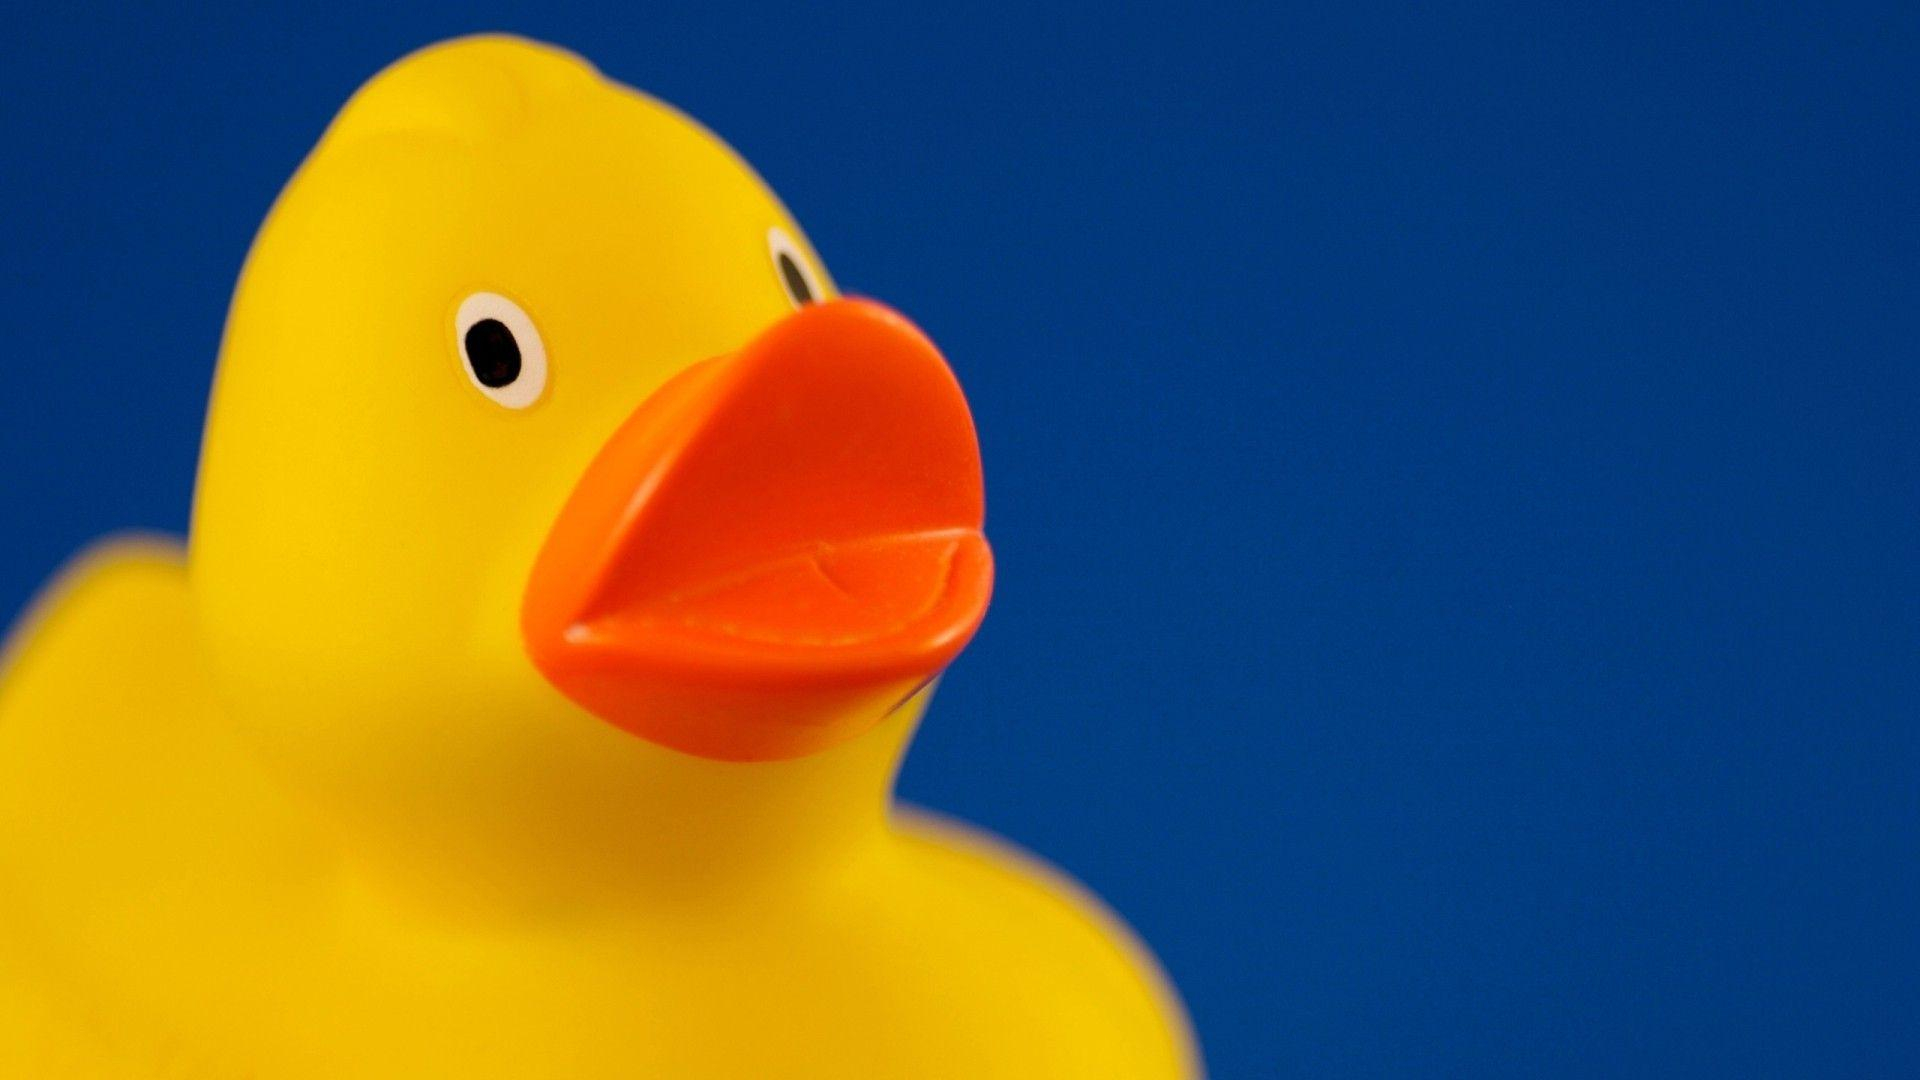 1920x1080 Rubber Ducky Wallpapers